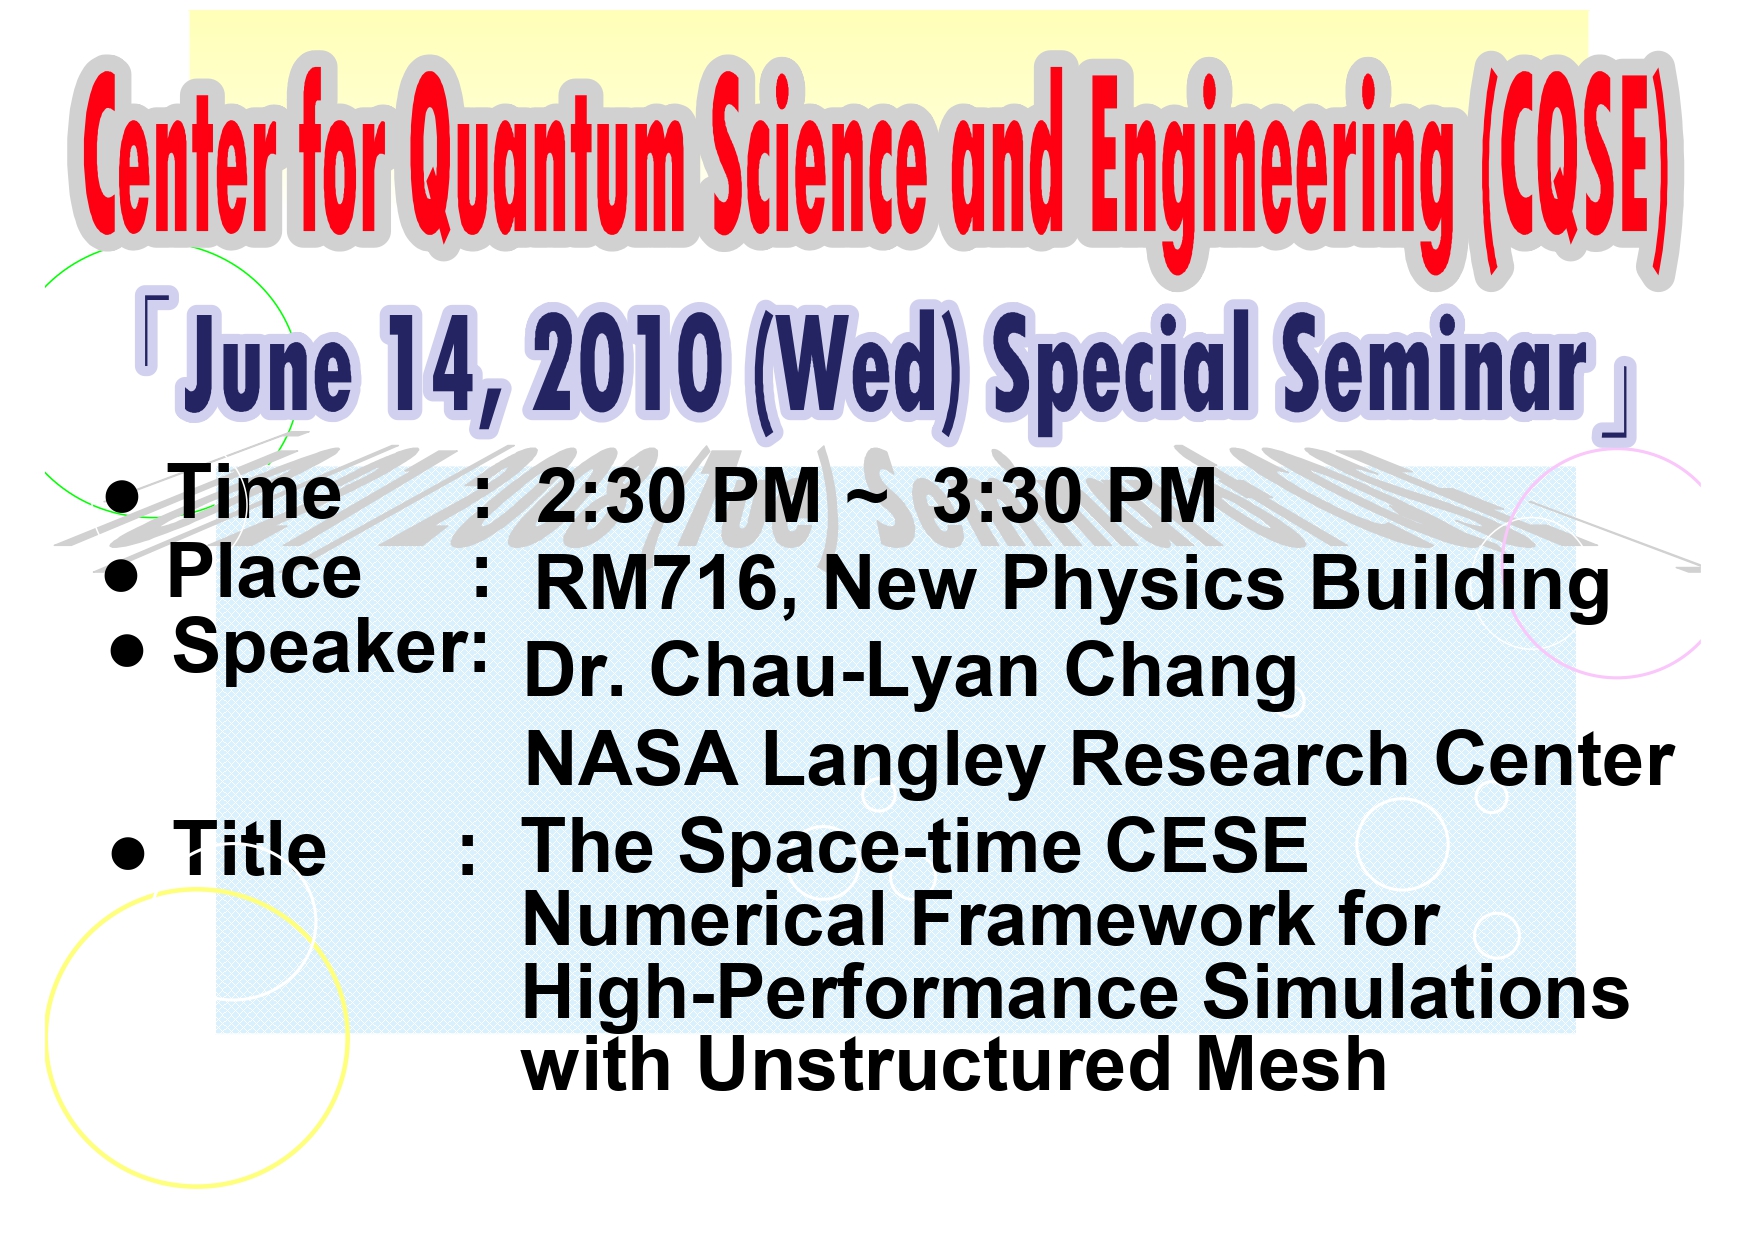 Special Seminar of Center for Quantum Science and Engineering (CQSE)